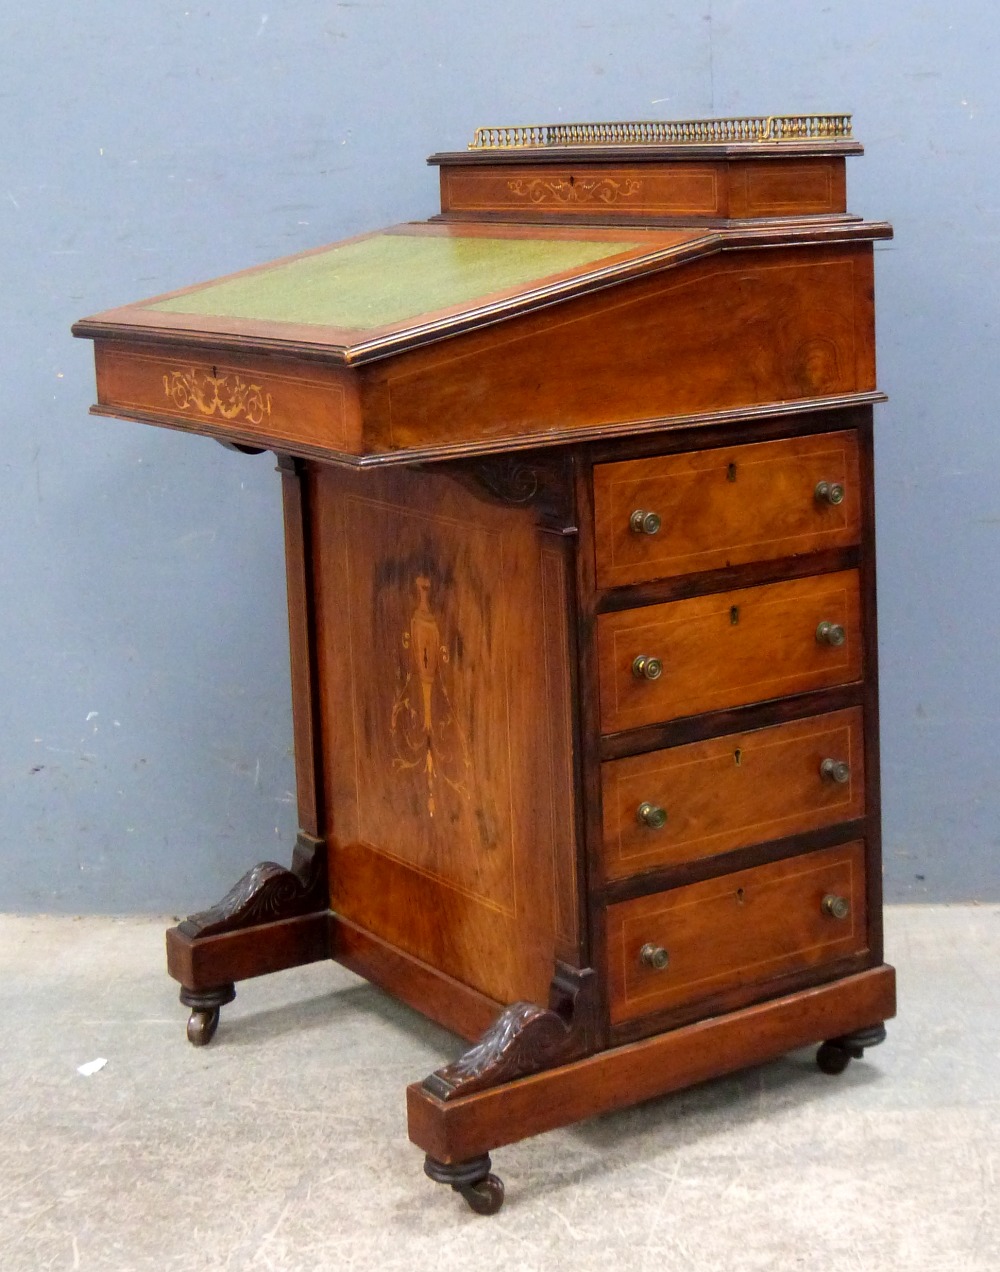 Victorian rosewood Davenport with marquetry inlaid decoration, raised back and four drawers on - Image 2 of 3